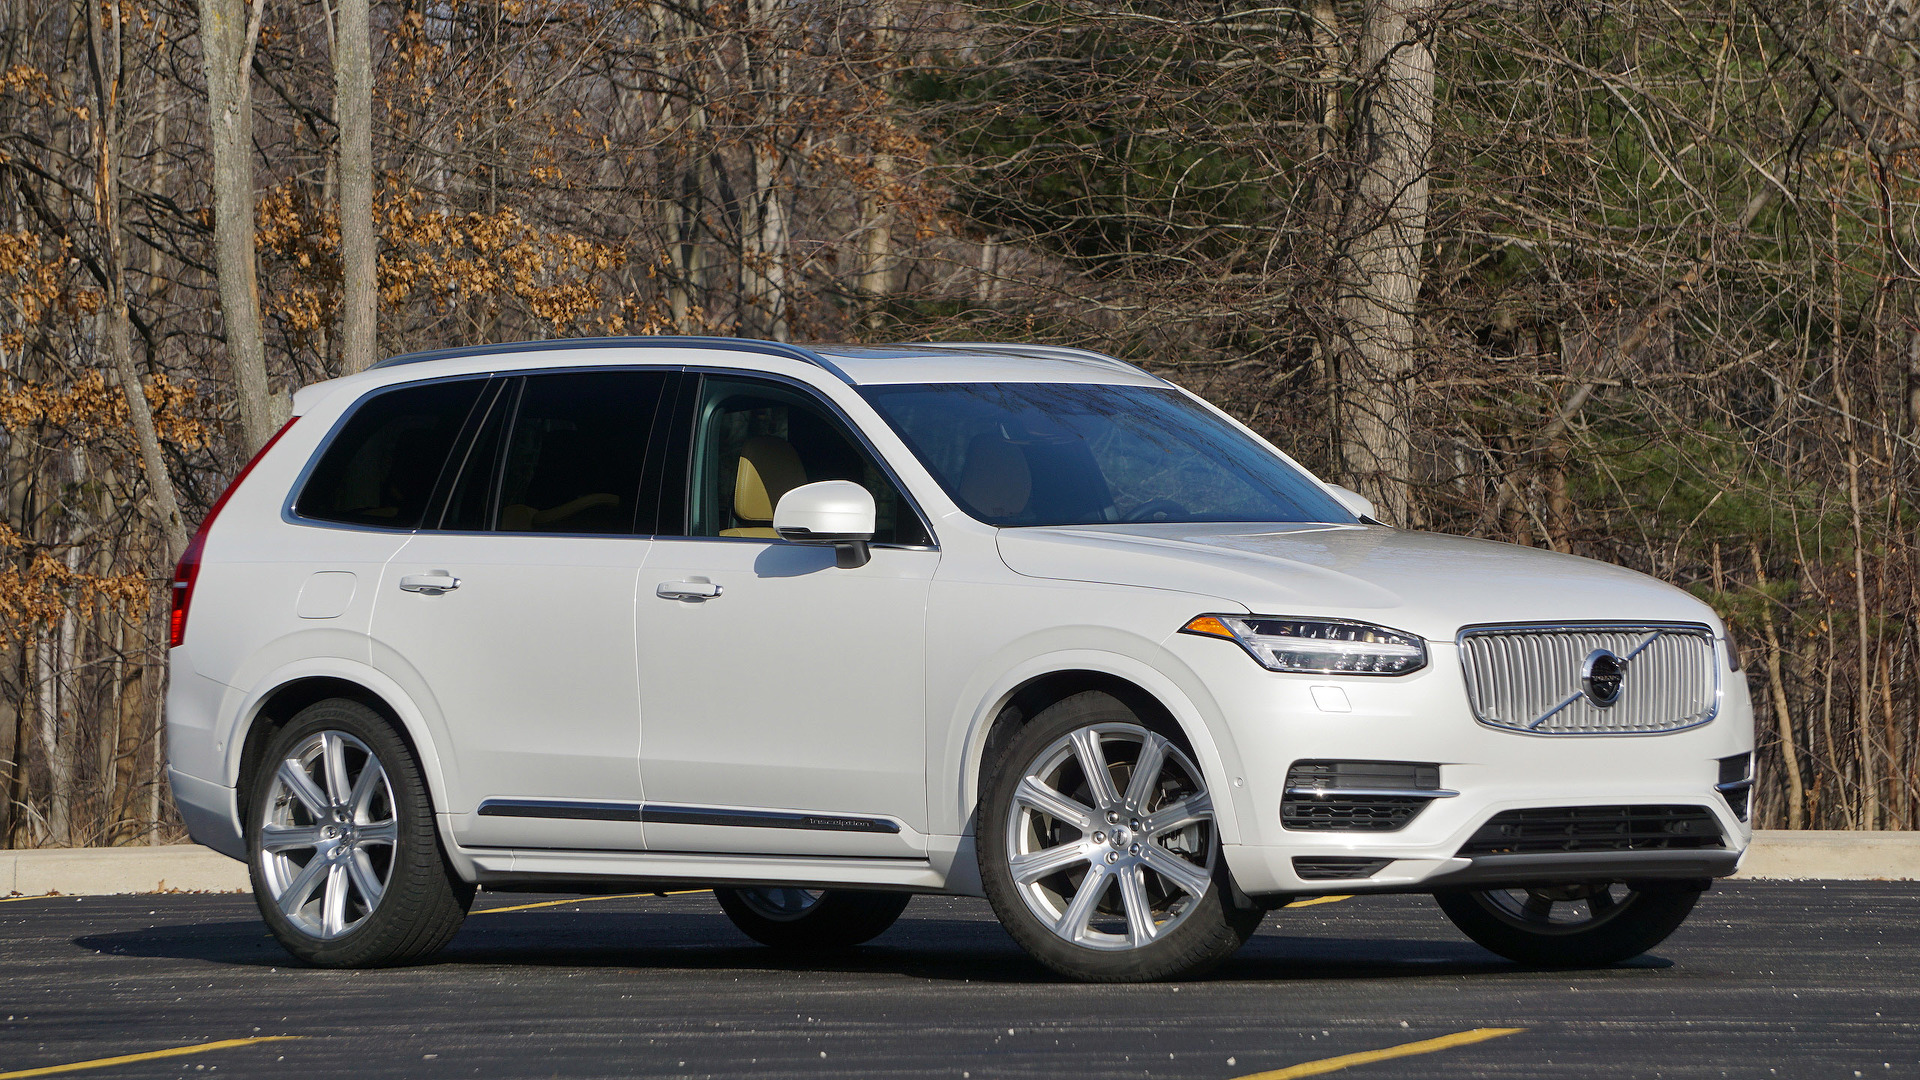 2017 Volvo XC90 Review: Just don't pick the PHEV